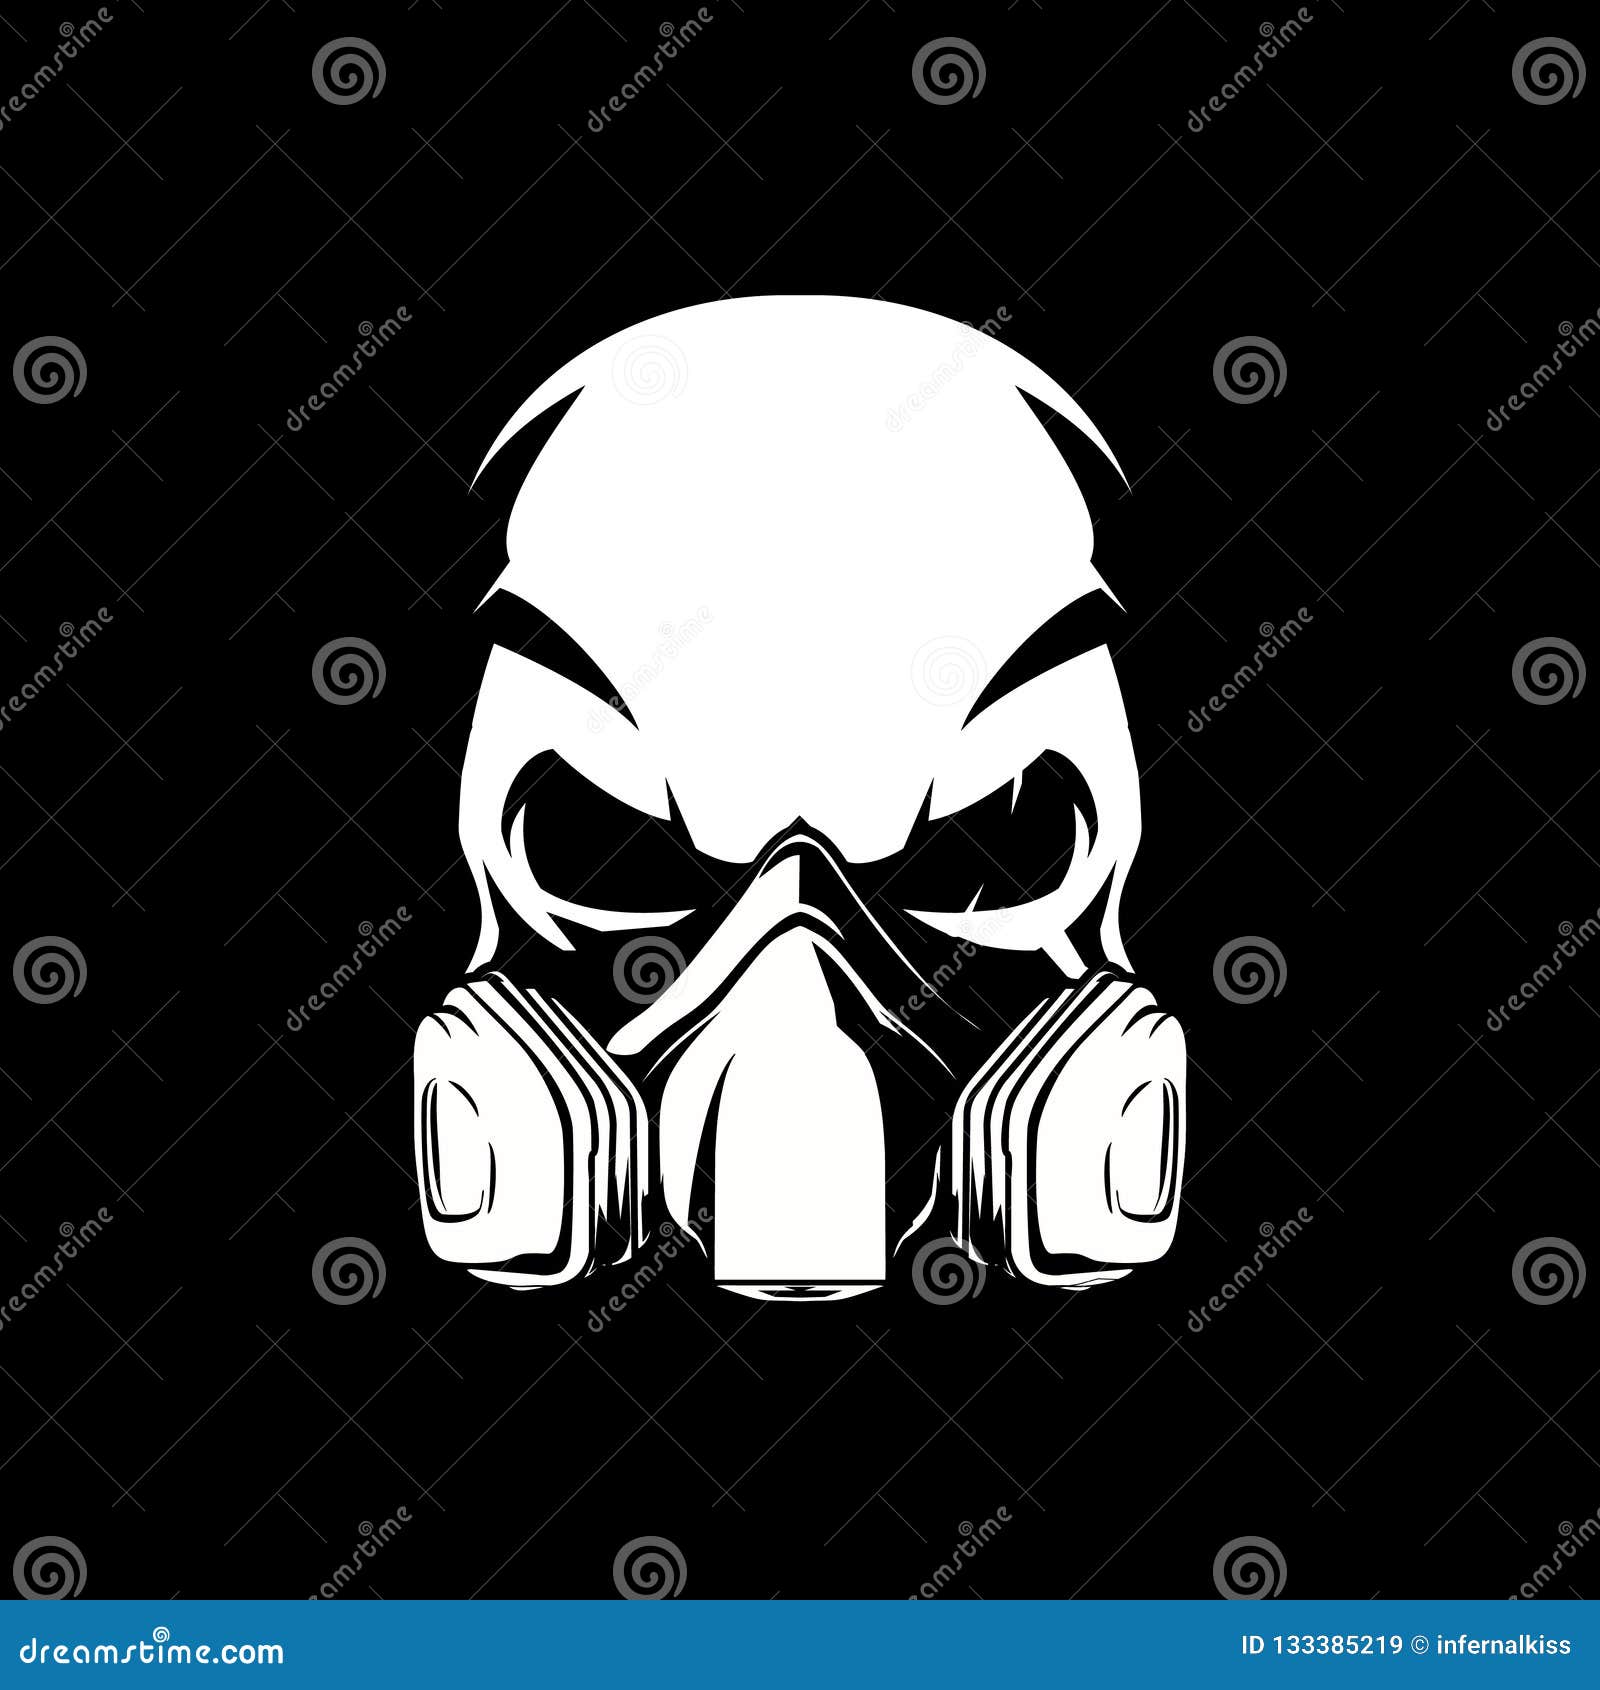 Black And White Skull With Paint Gas Mask Vector Stock Vector Illustration Of Badge Clothing 133385219 - w car decal roblox skull with gas mask vector free